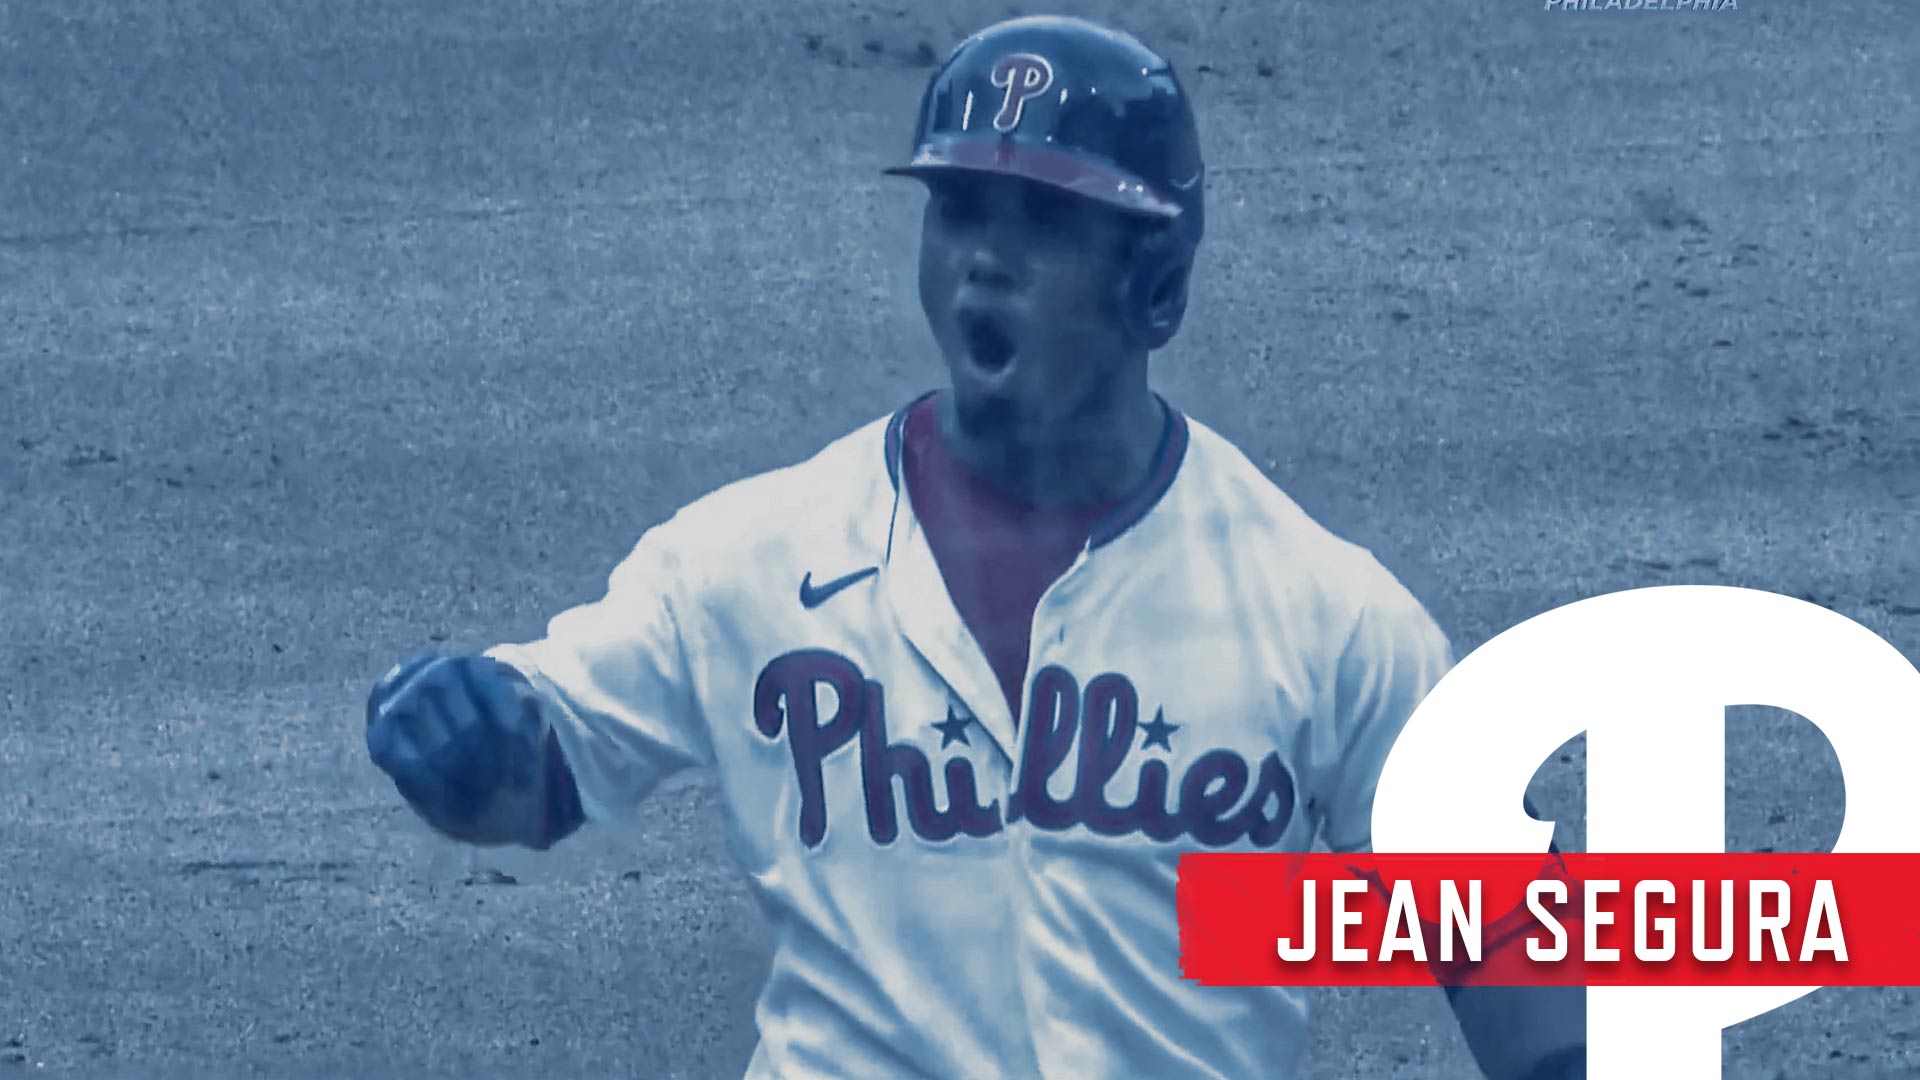 Jean Segura stays hot with 2-run base hit; 4-0 Phillies early